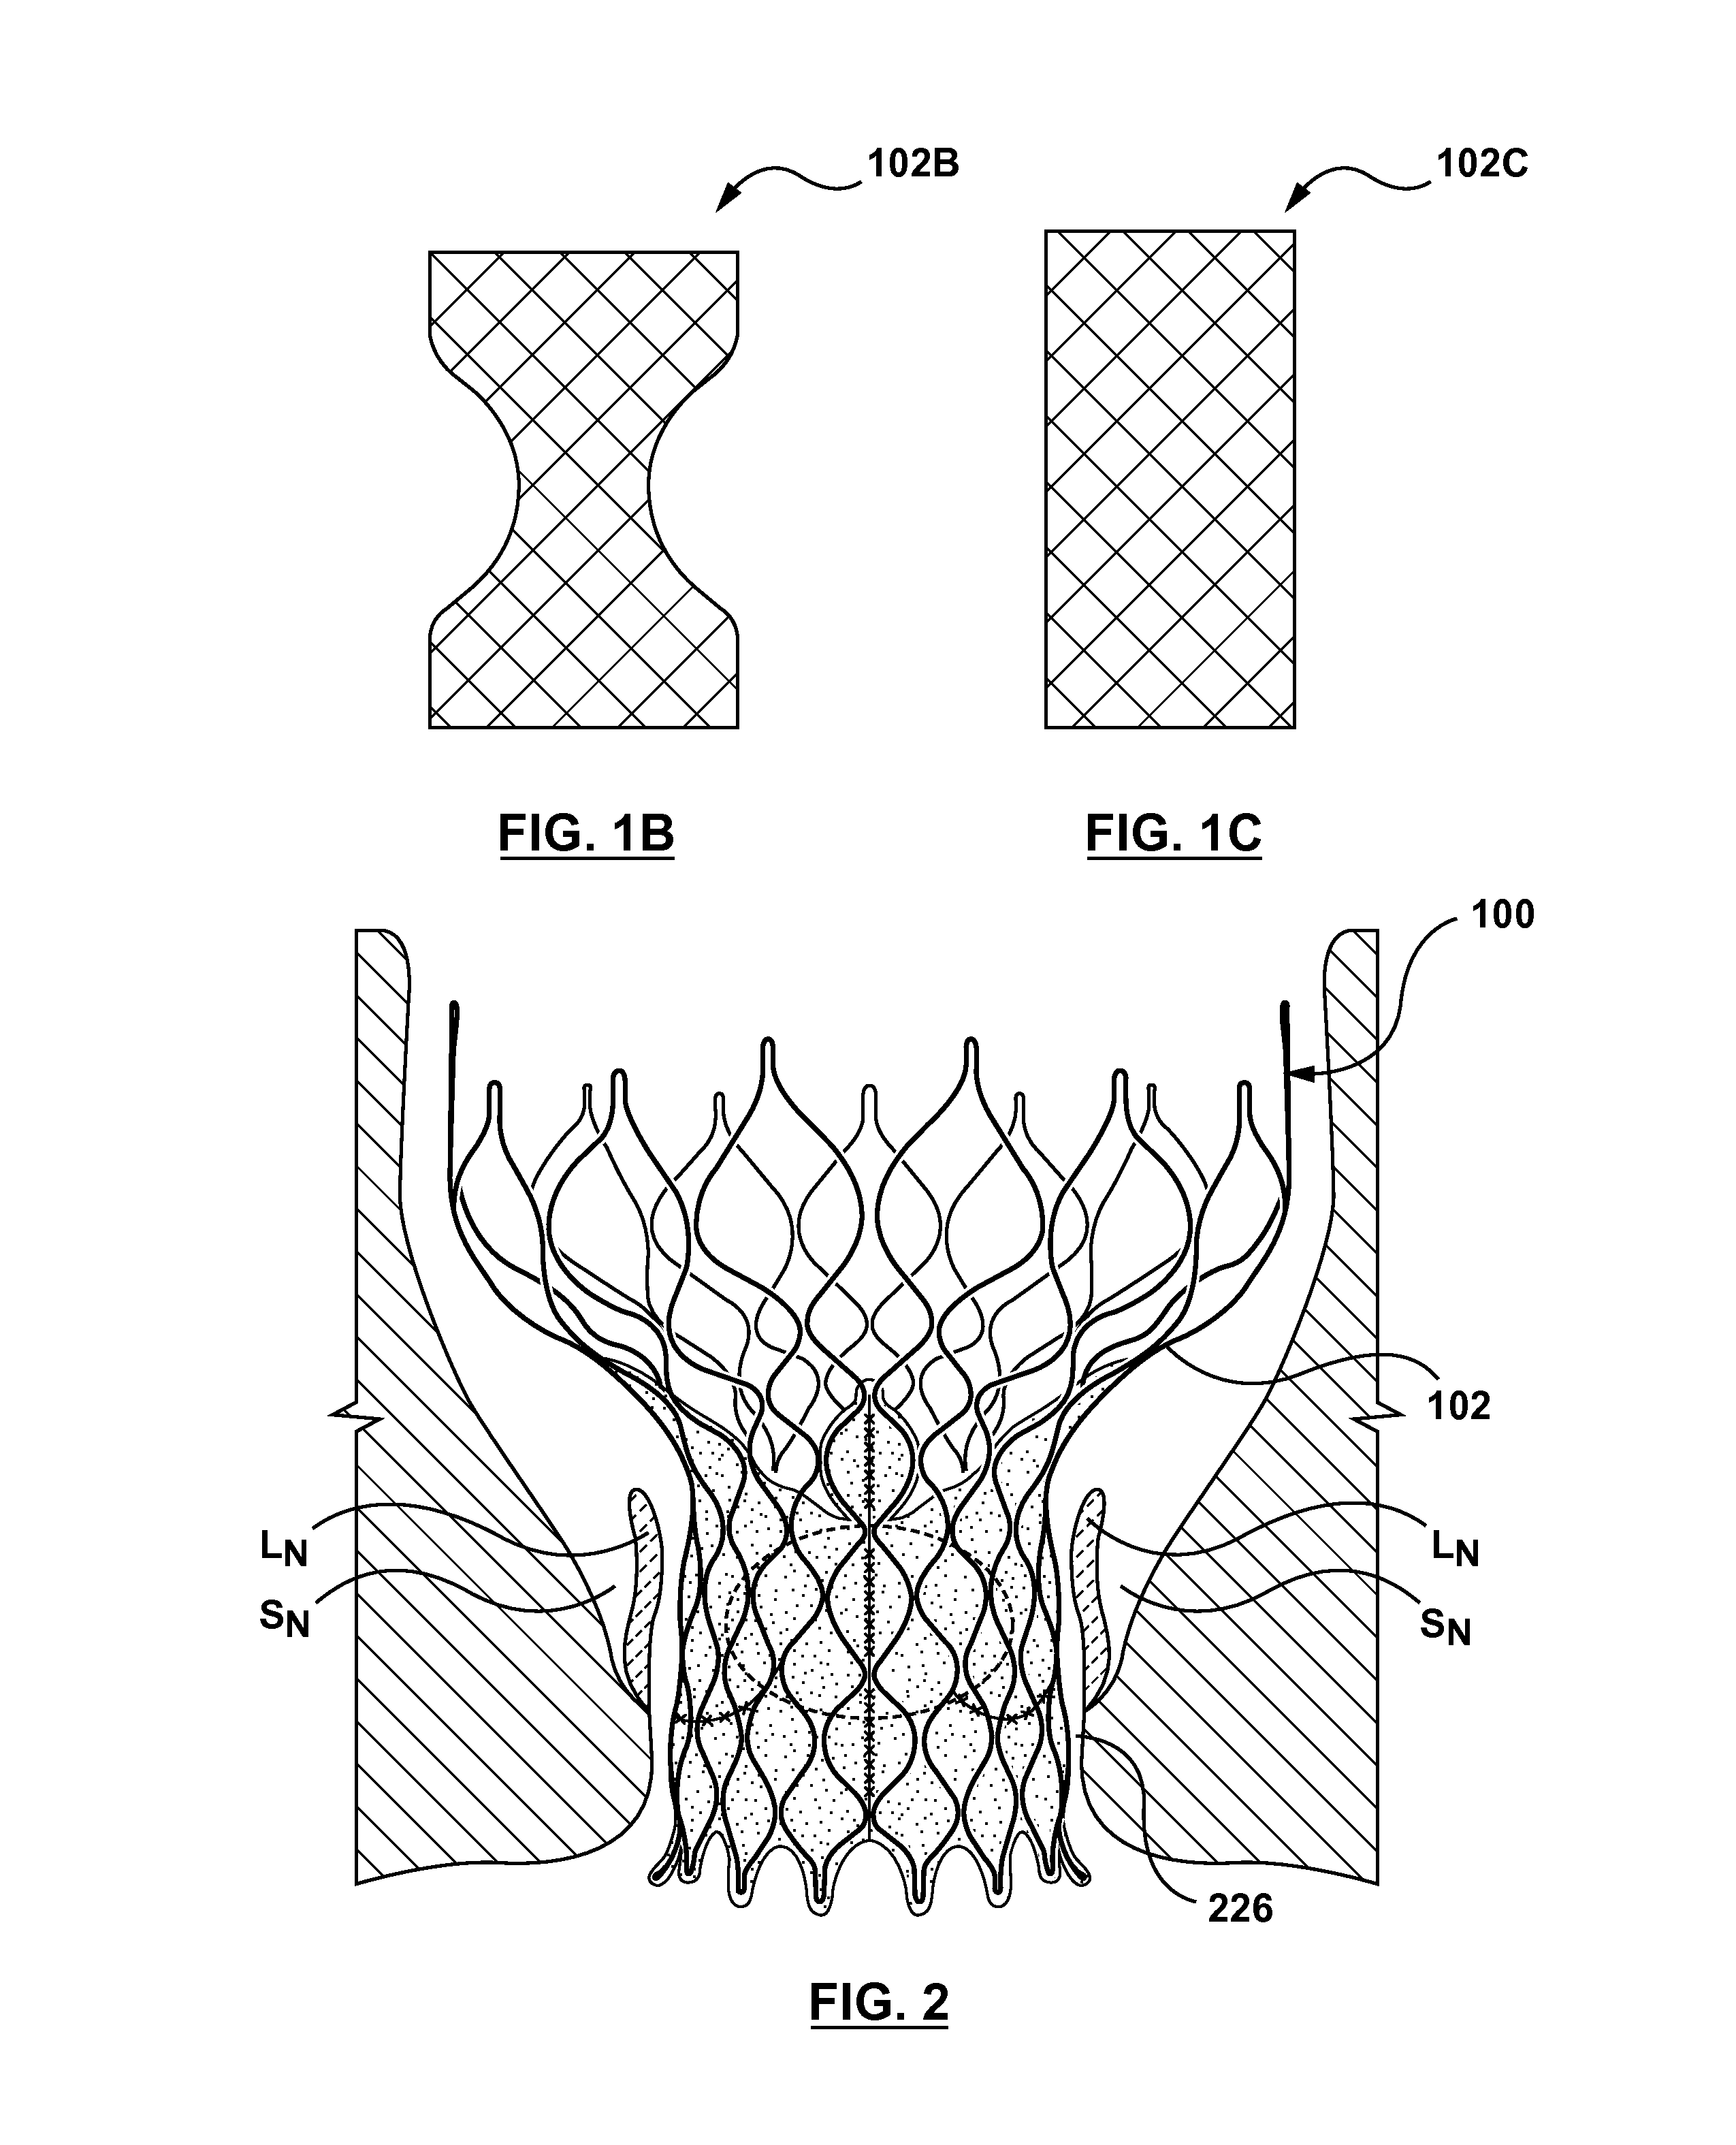 Transcatheter valve prostheses having a sealing component formed from tissue having an altered extracellular matrix